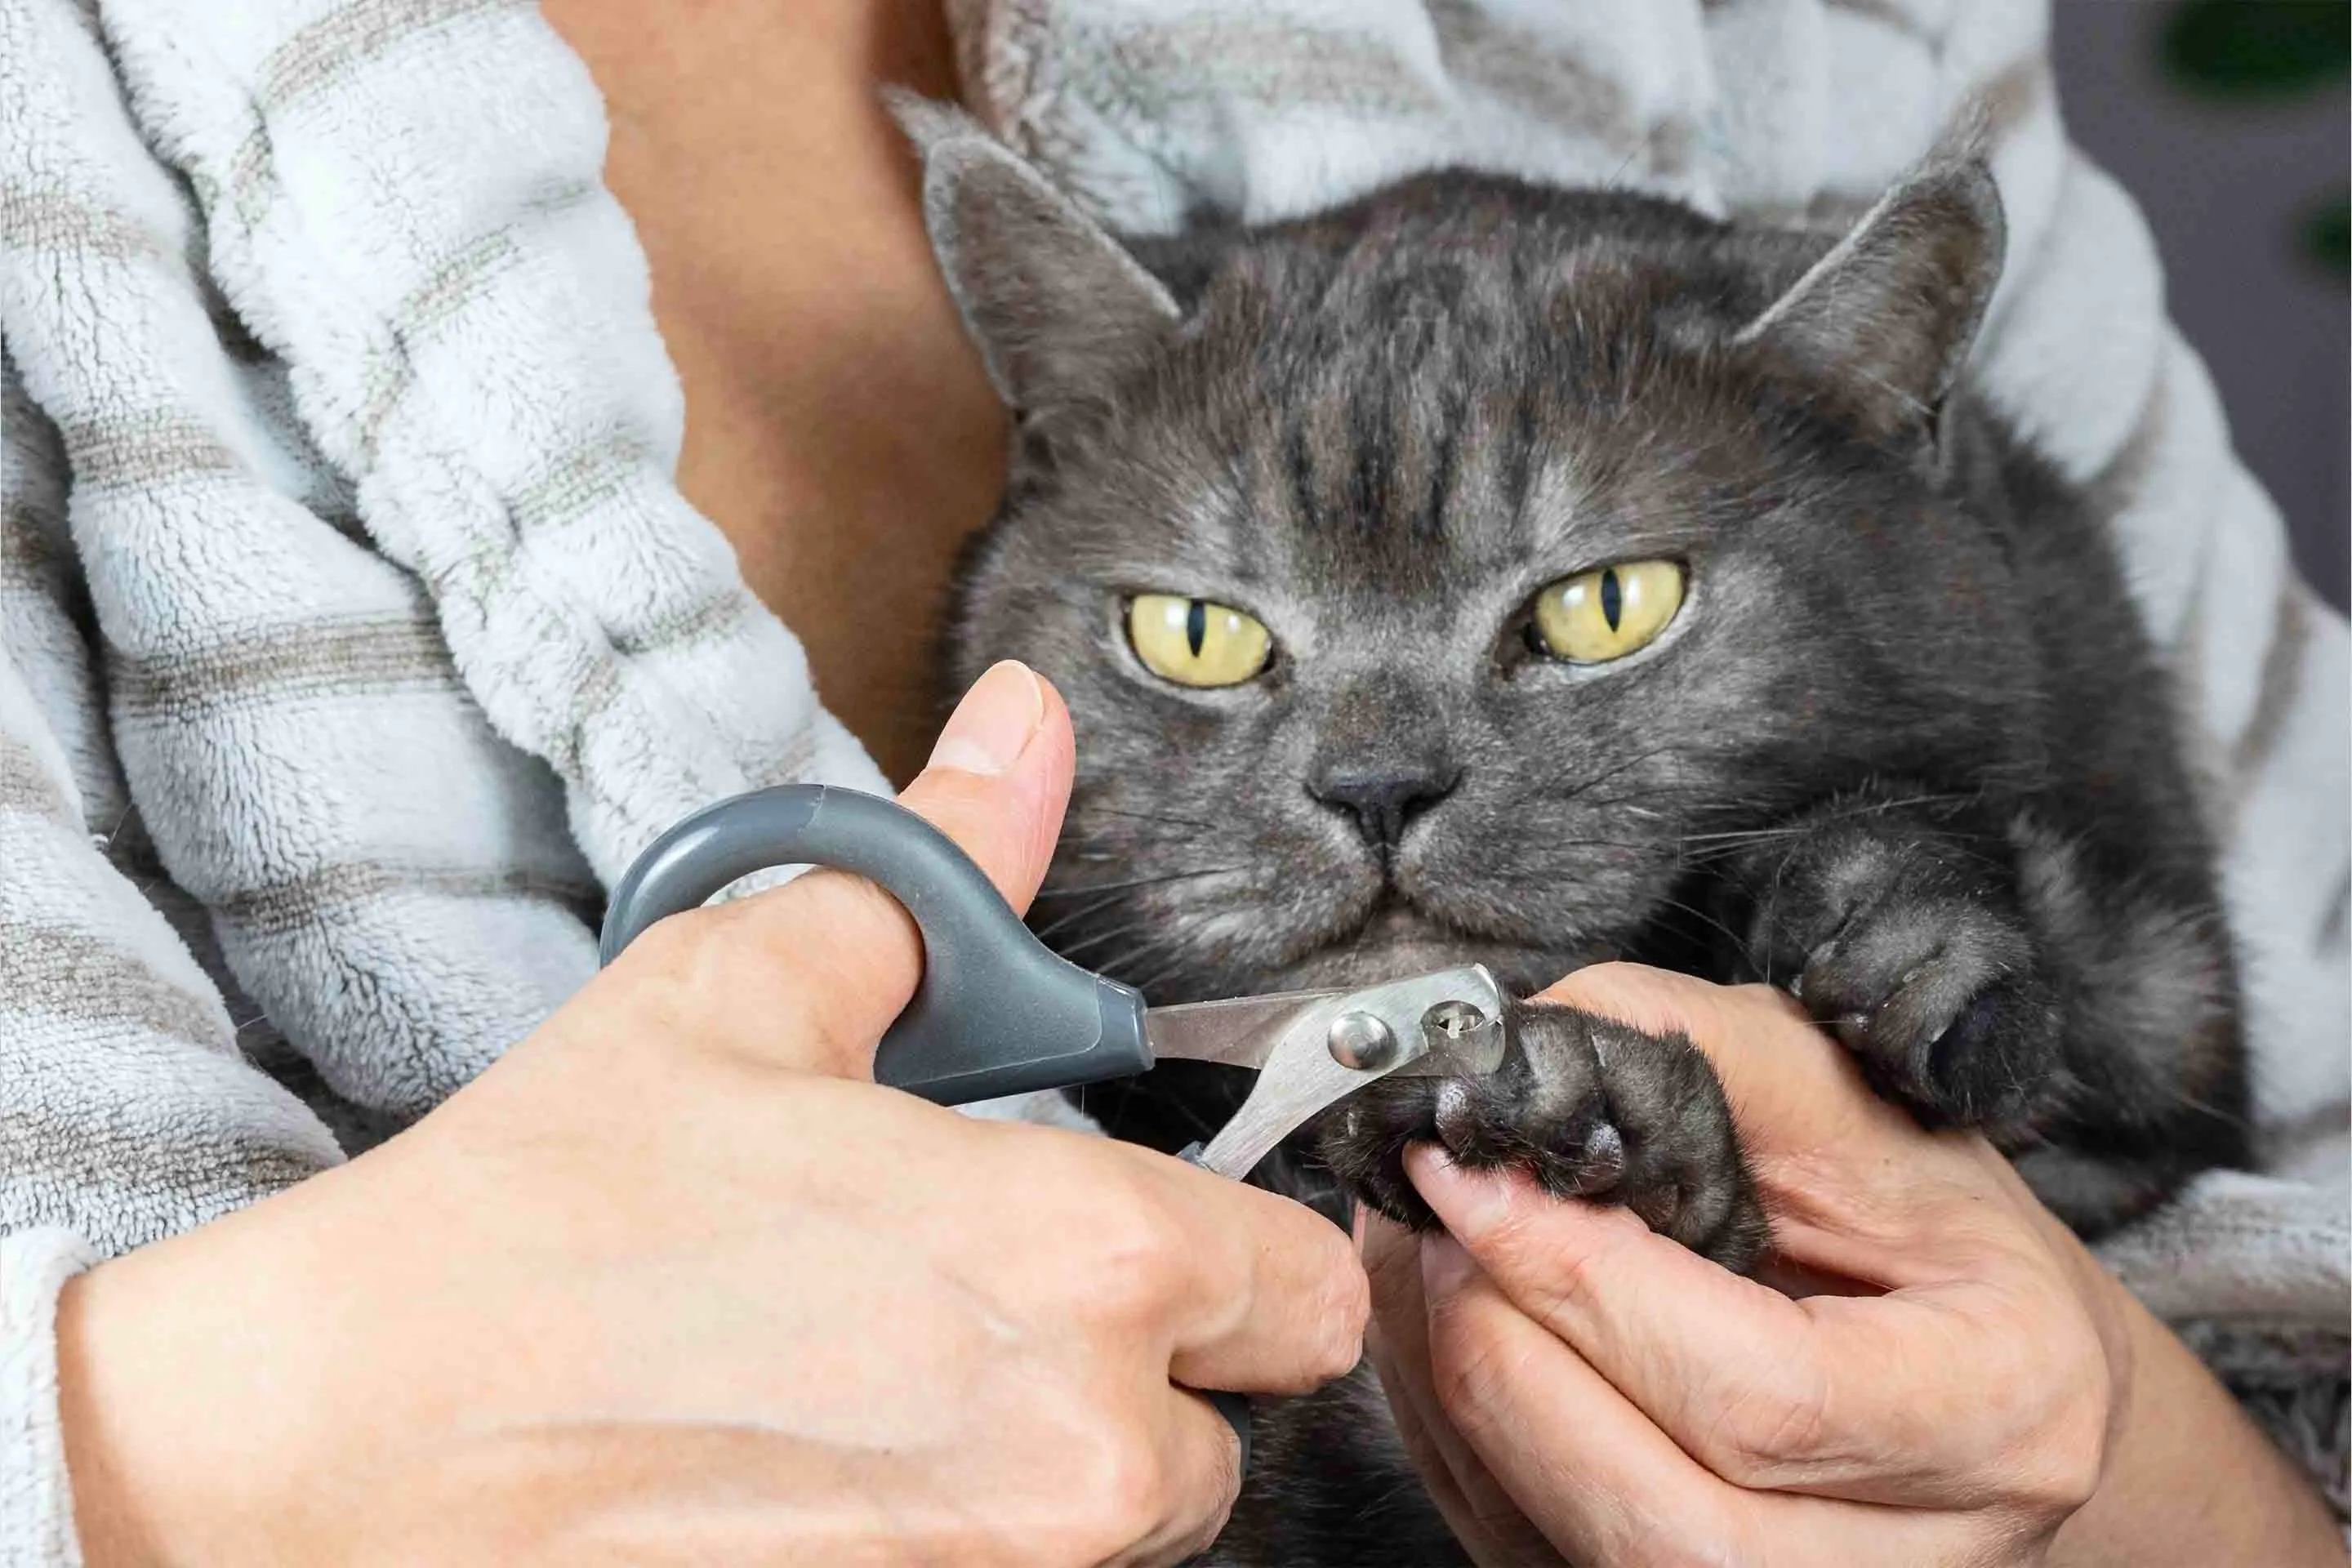 Grooming Tips | How to Trim Your Cats Nails | Petfinder